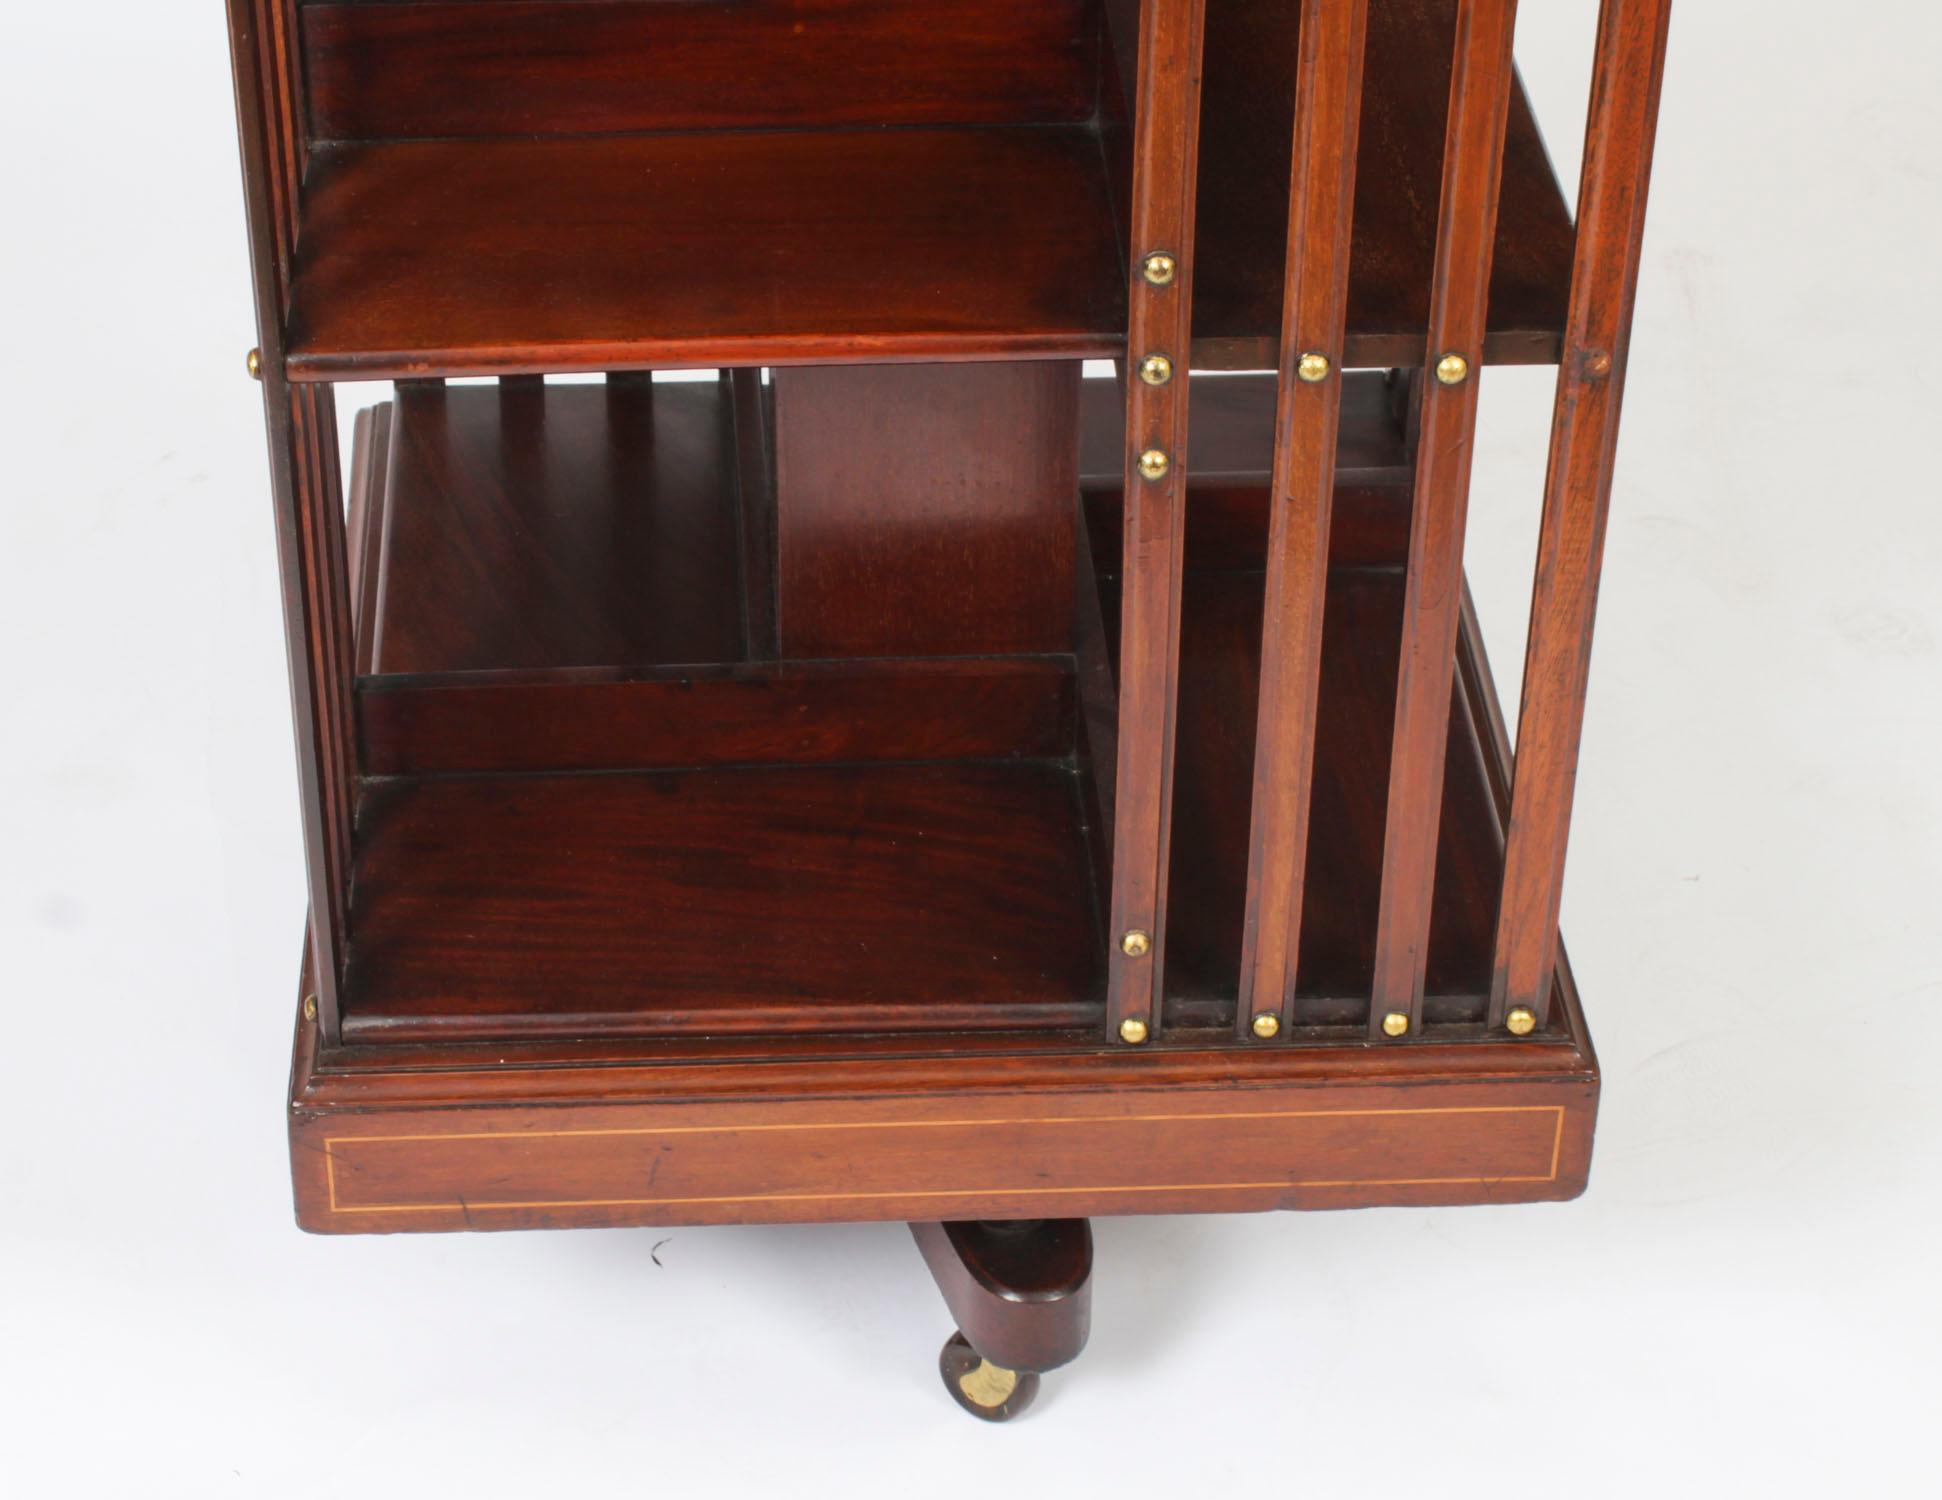 Antique Edwardian Revolving Bookcase Flame Mahogany c.1900 For Sale 4